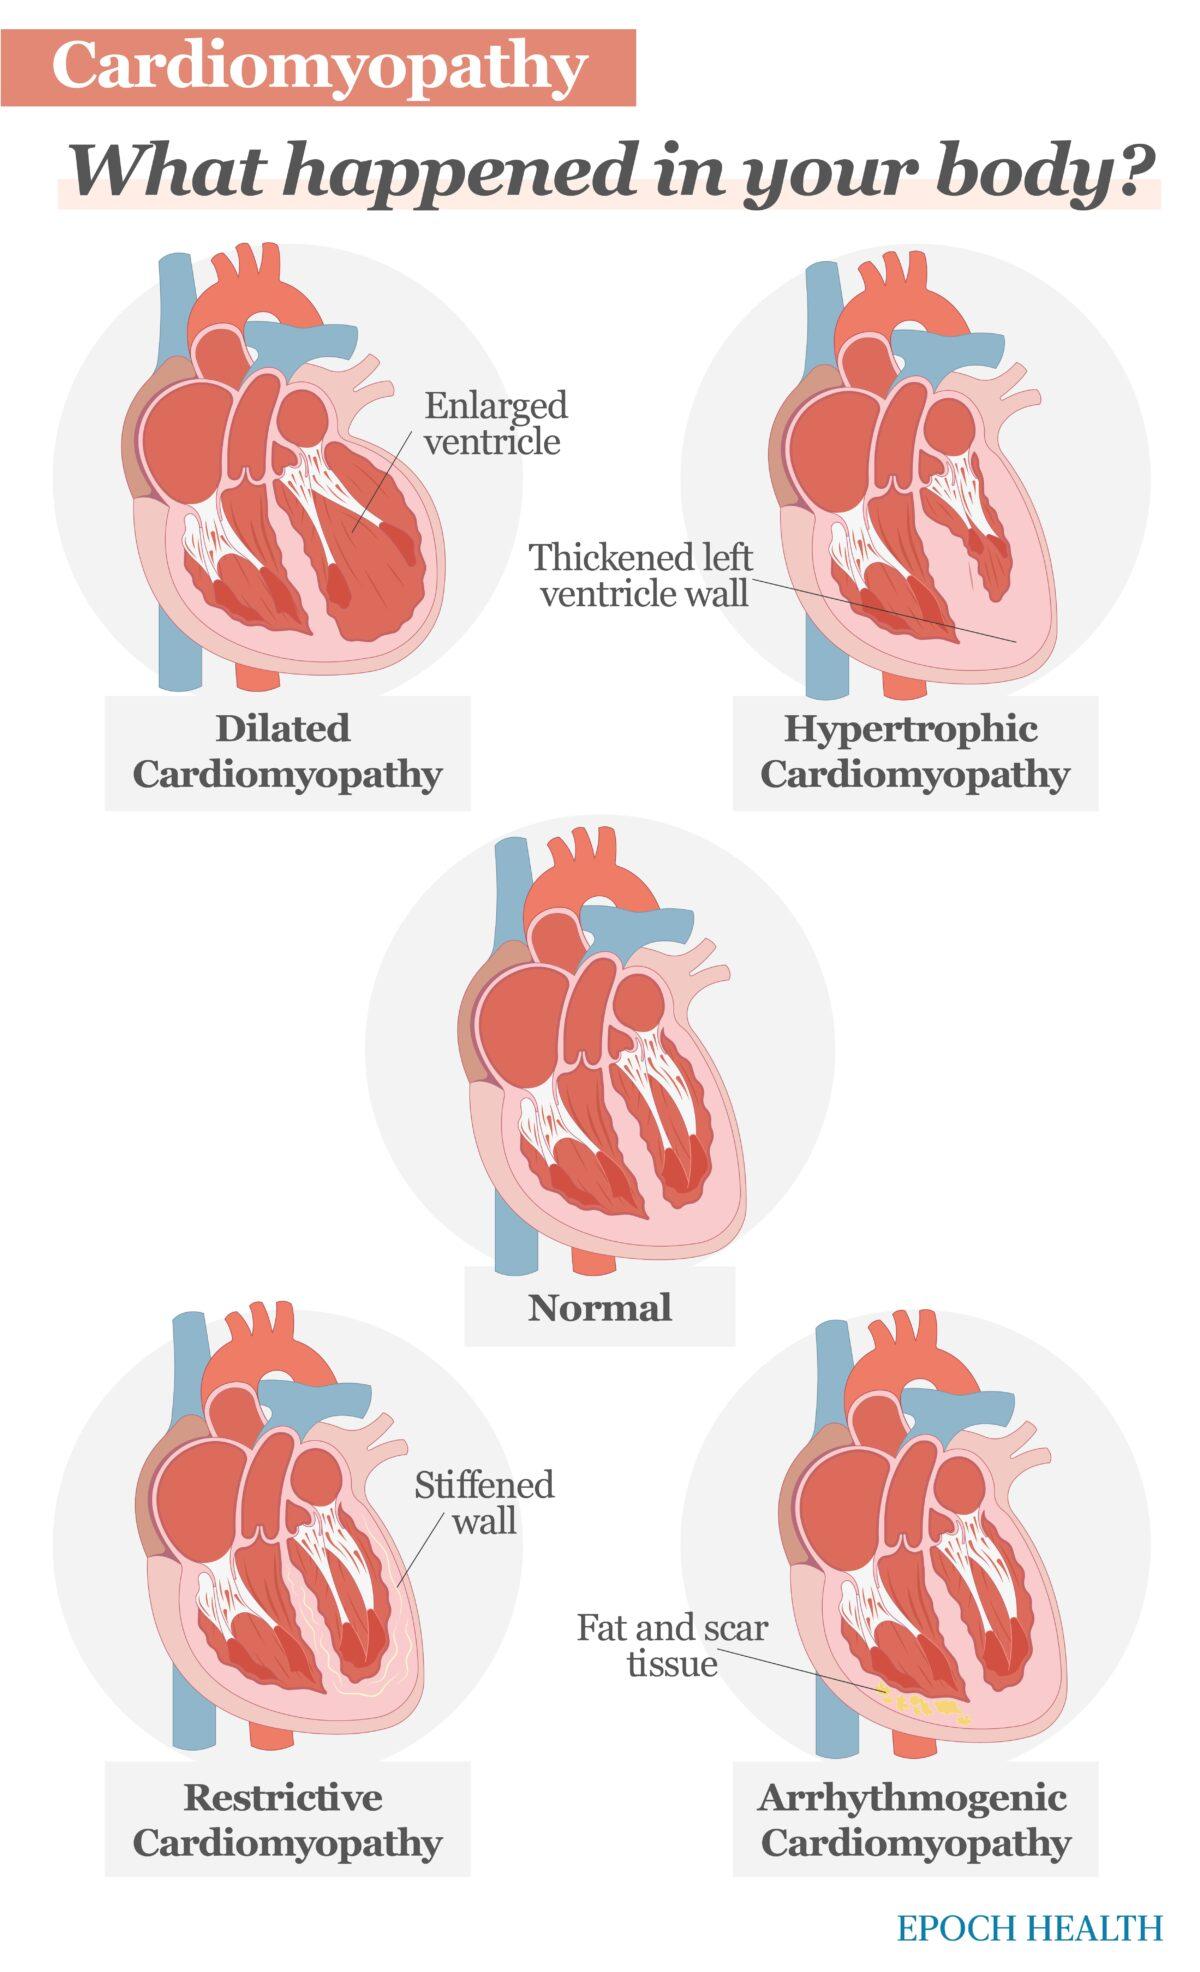 Cardiomyopathy has four main types: dilated cardiomyopathy, hypertrophic cardiomyopathy, restrictive cardiomyopathy, and arrhythmogenic cardiomyopathy. (The Epoch Times)